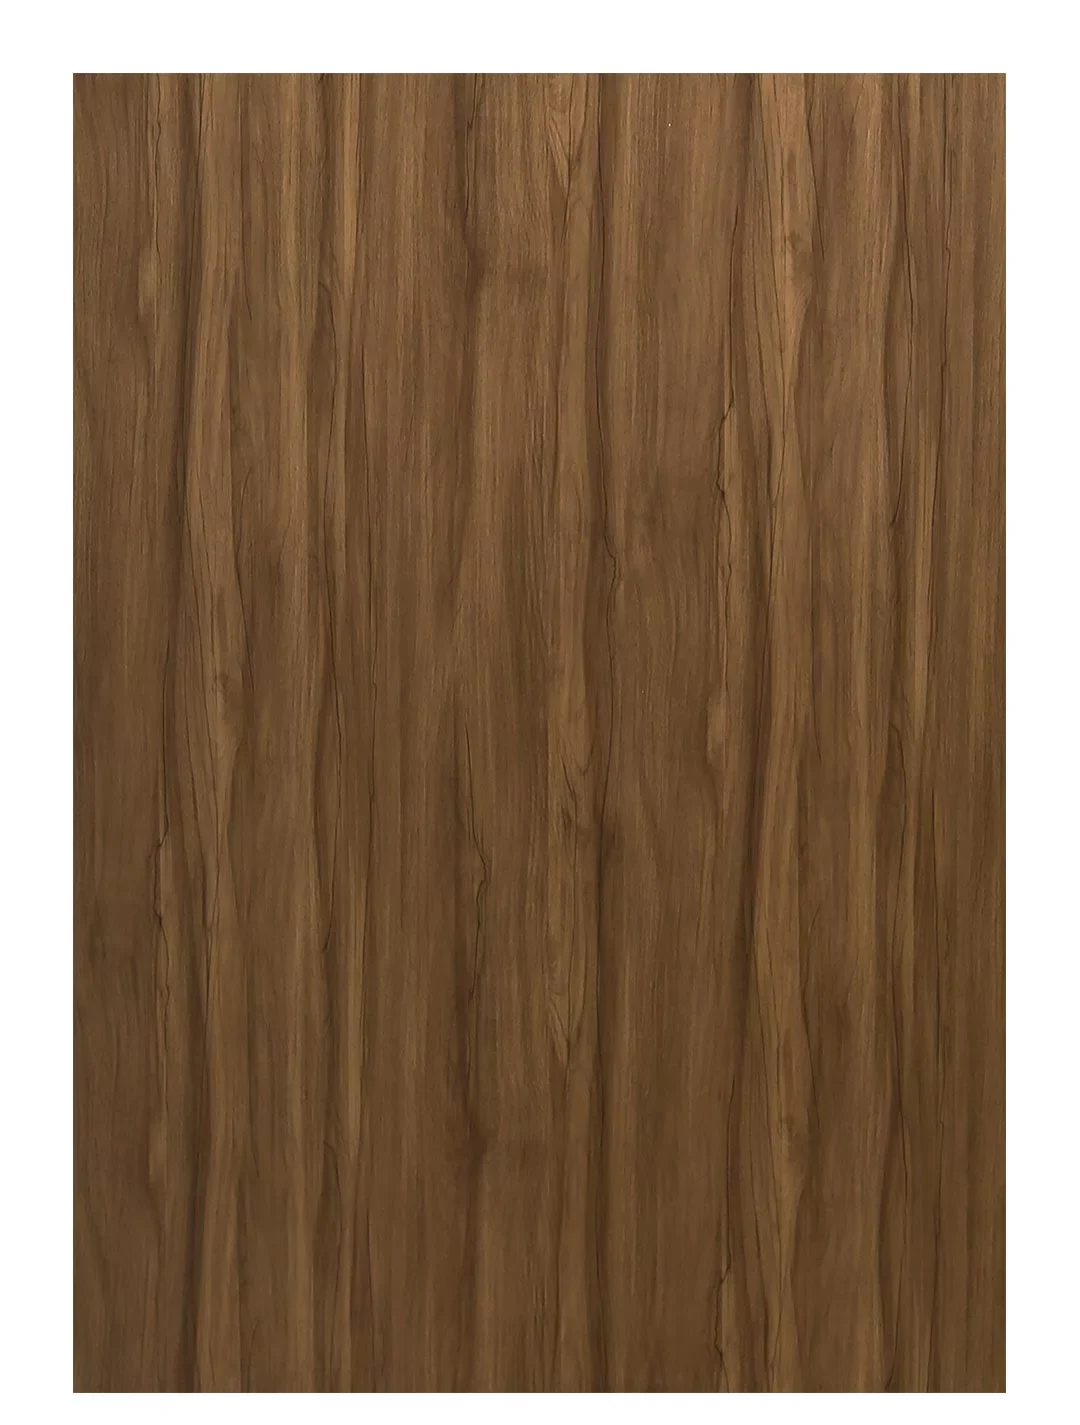 Alutech - Natural Wood | NW-205 - TINEO